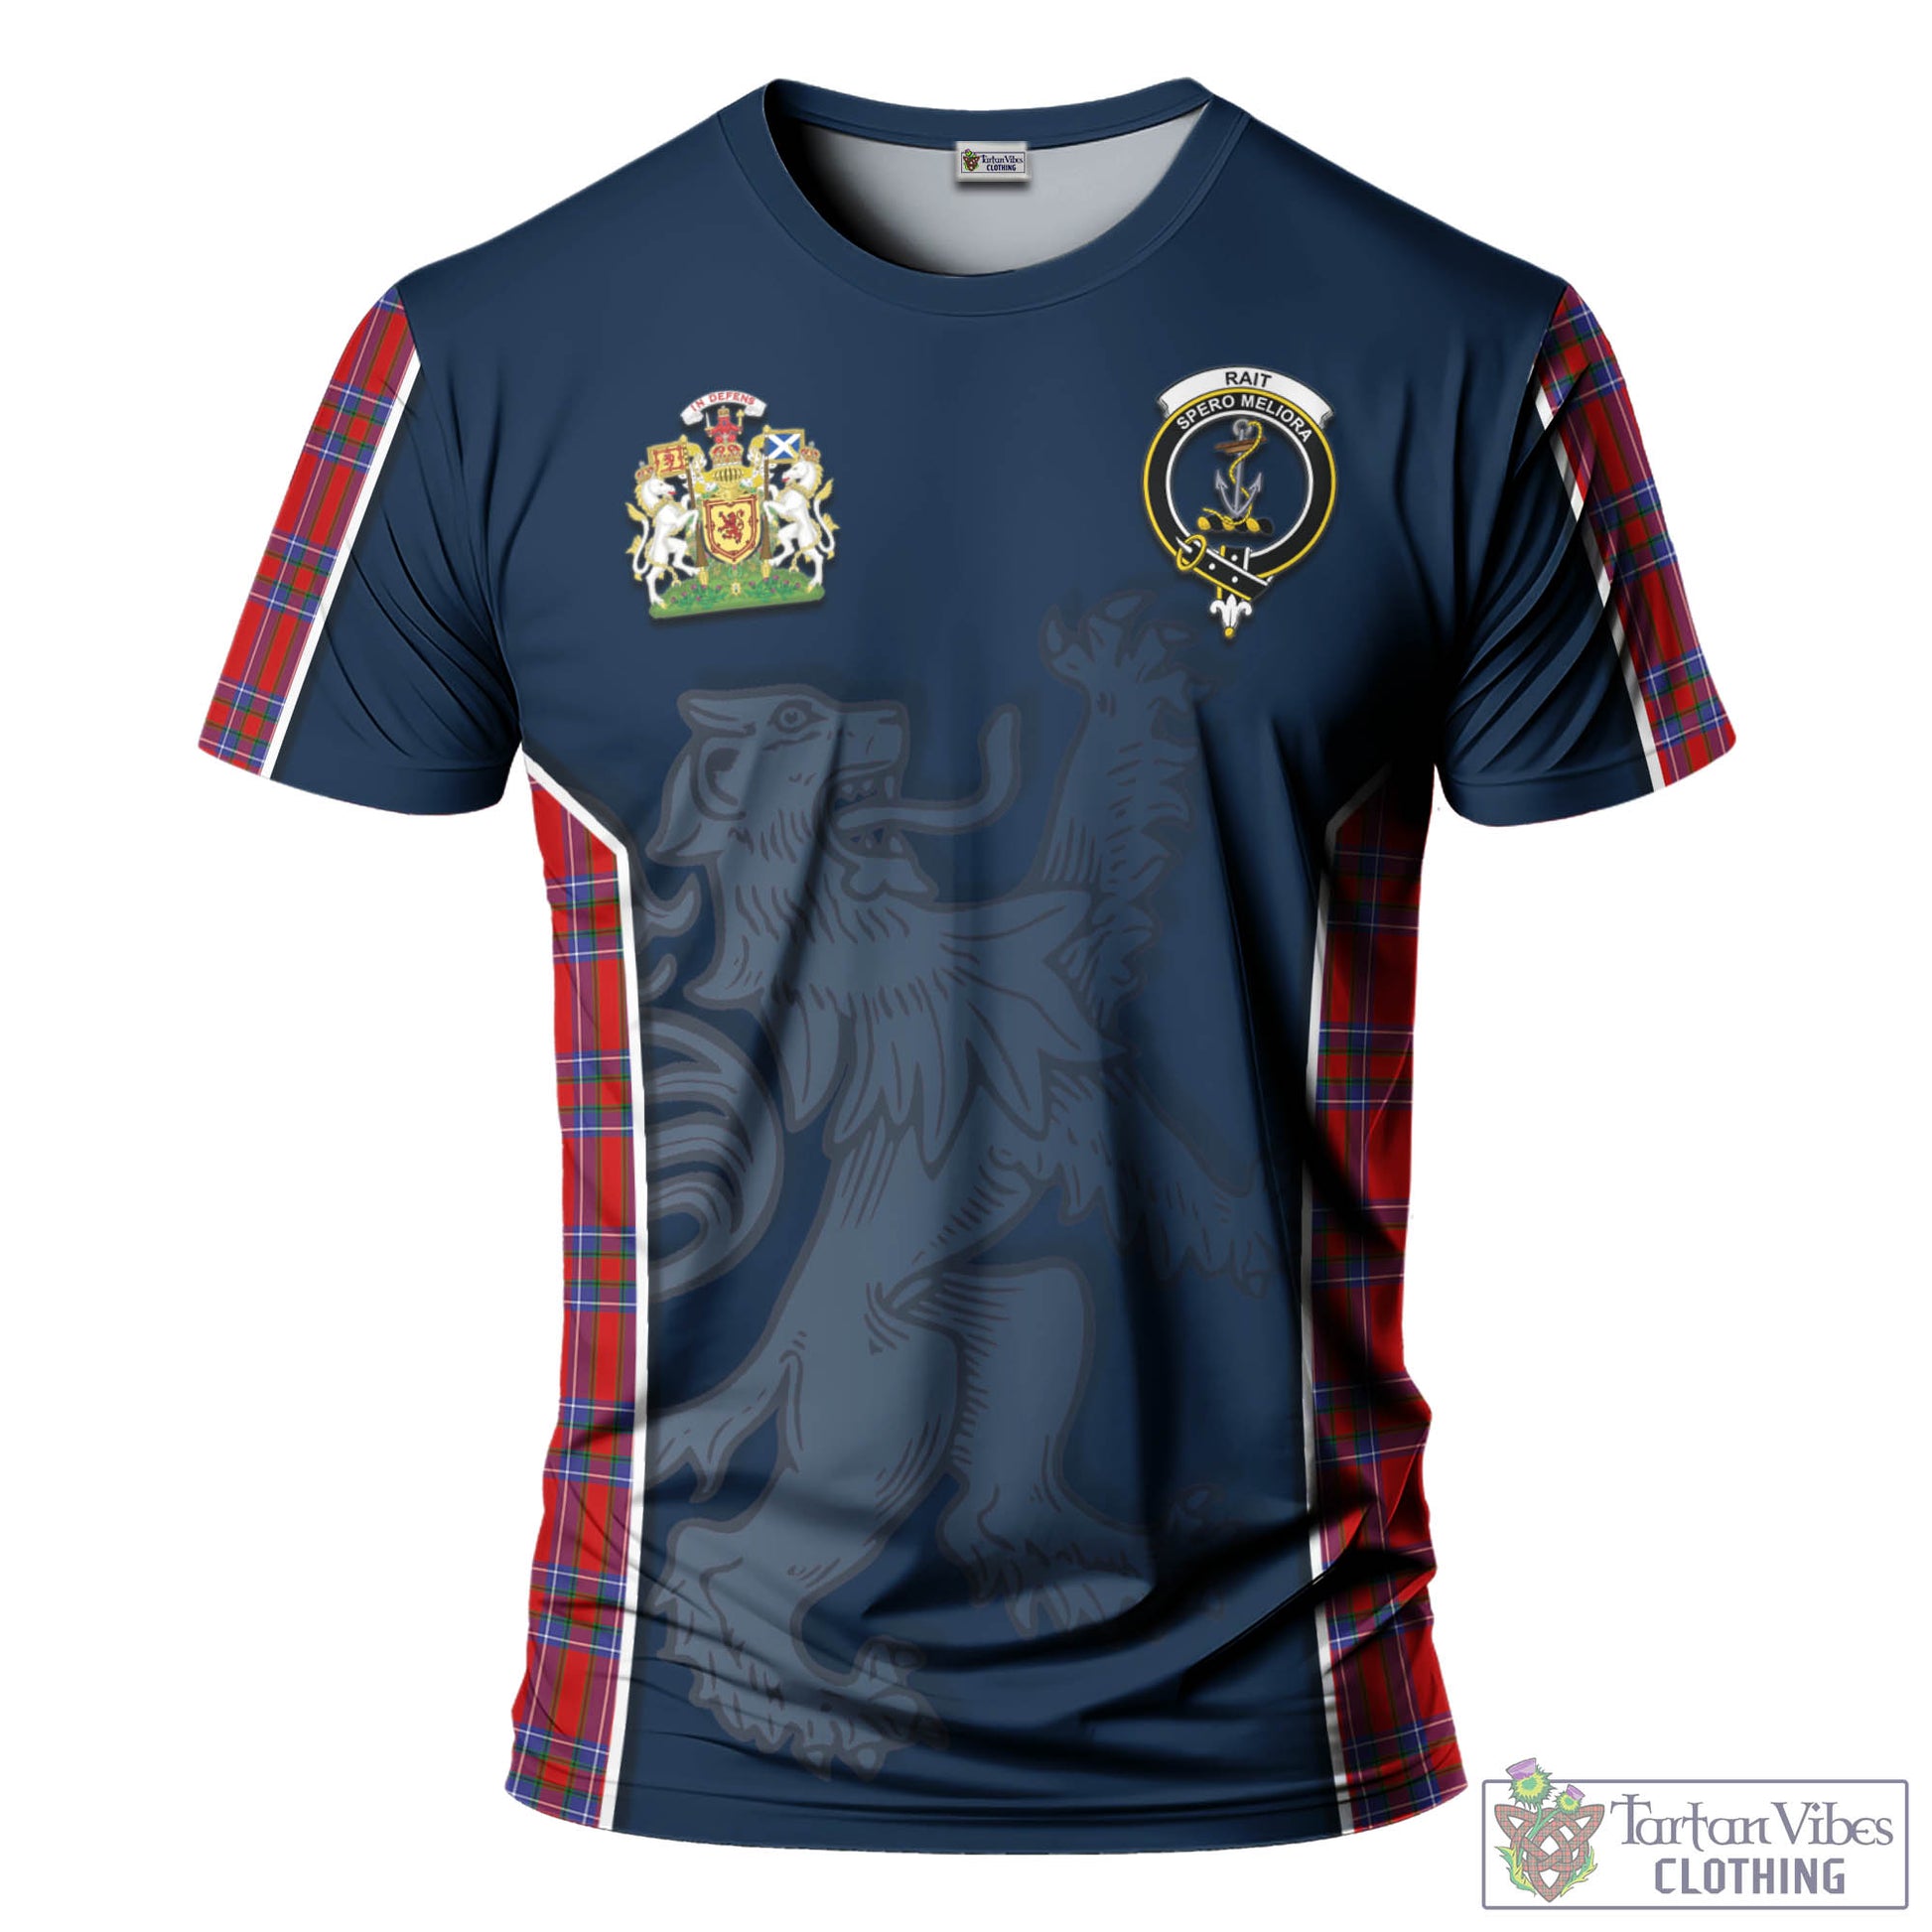 Tartan Vibes Clothing Rait Tartan T-Shirt with Family Crest and Lion Rampant Vibes Sport Style